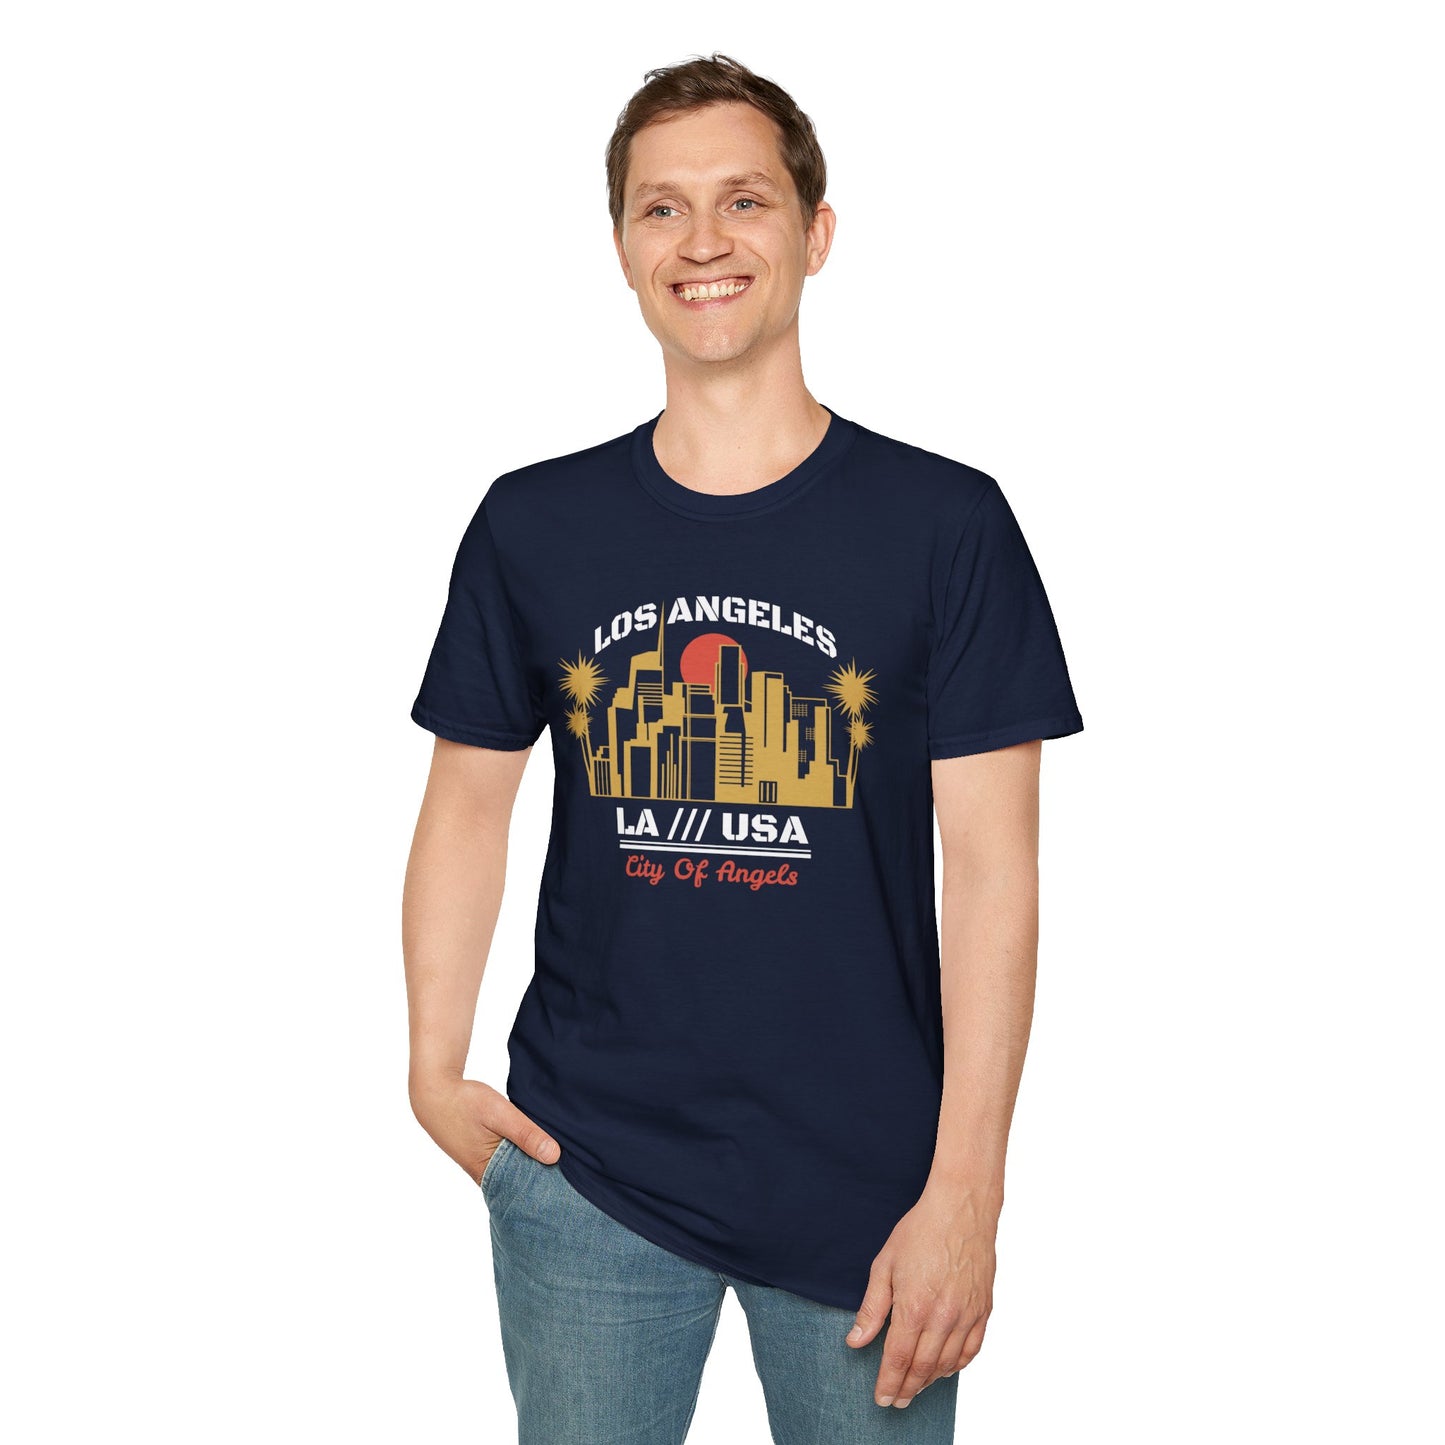 Discover LA Vibes: Stylish and Comfortable Los Angeles Graphic Tee for Trendsetters